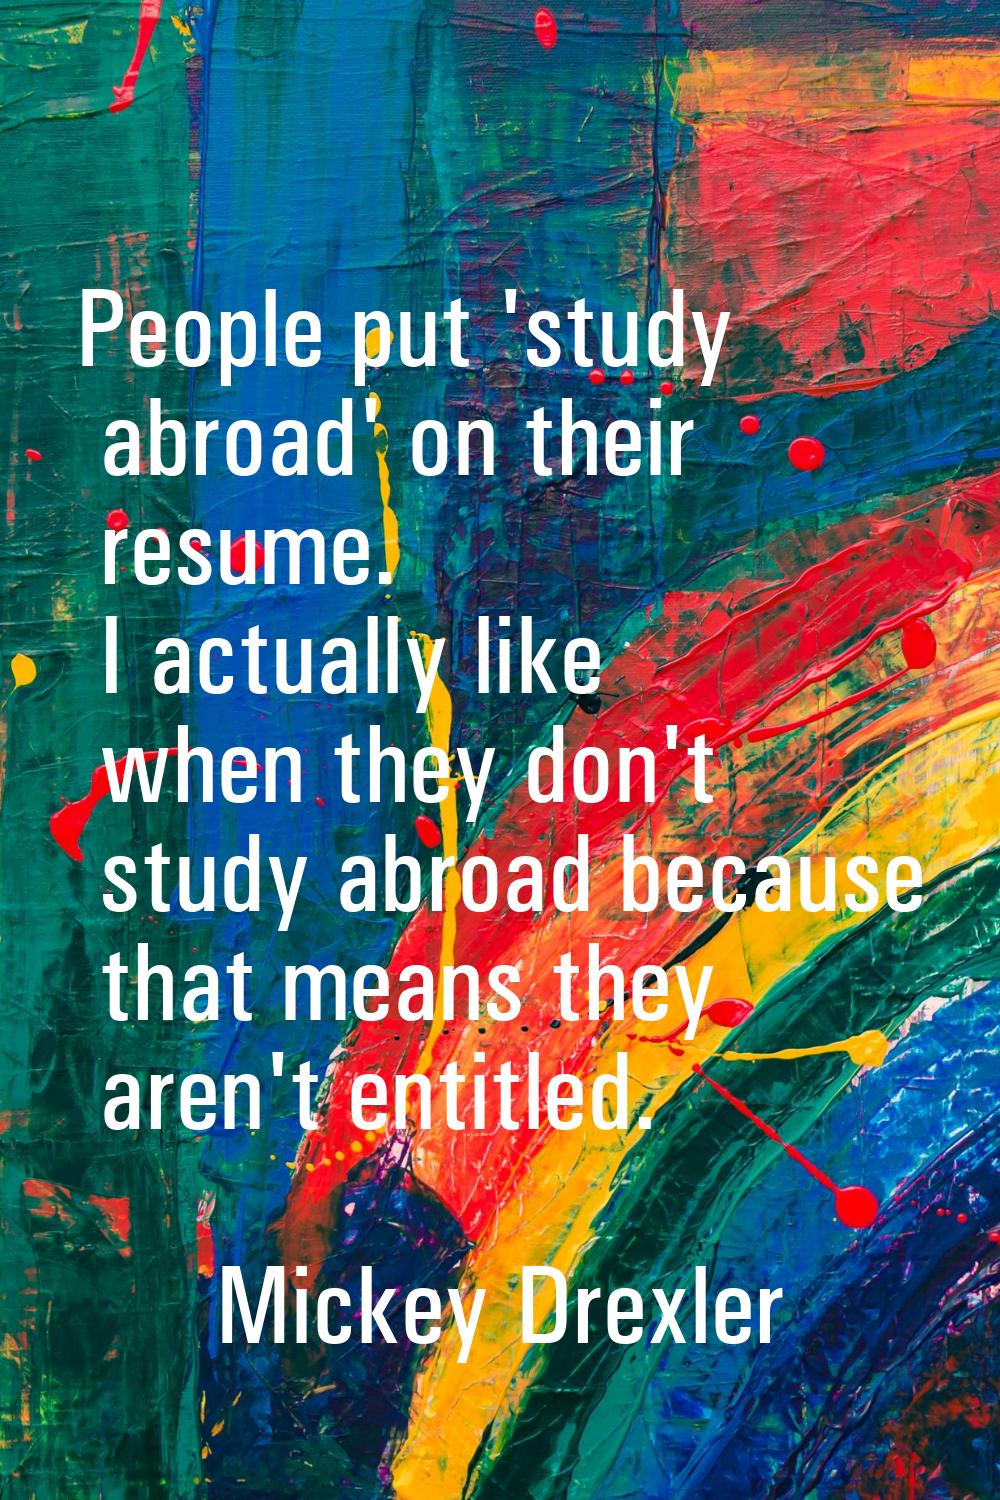 People put 'study abroad' on their resume. I actually like when they don't study abroad because tha